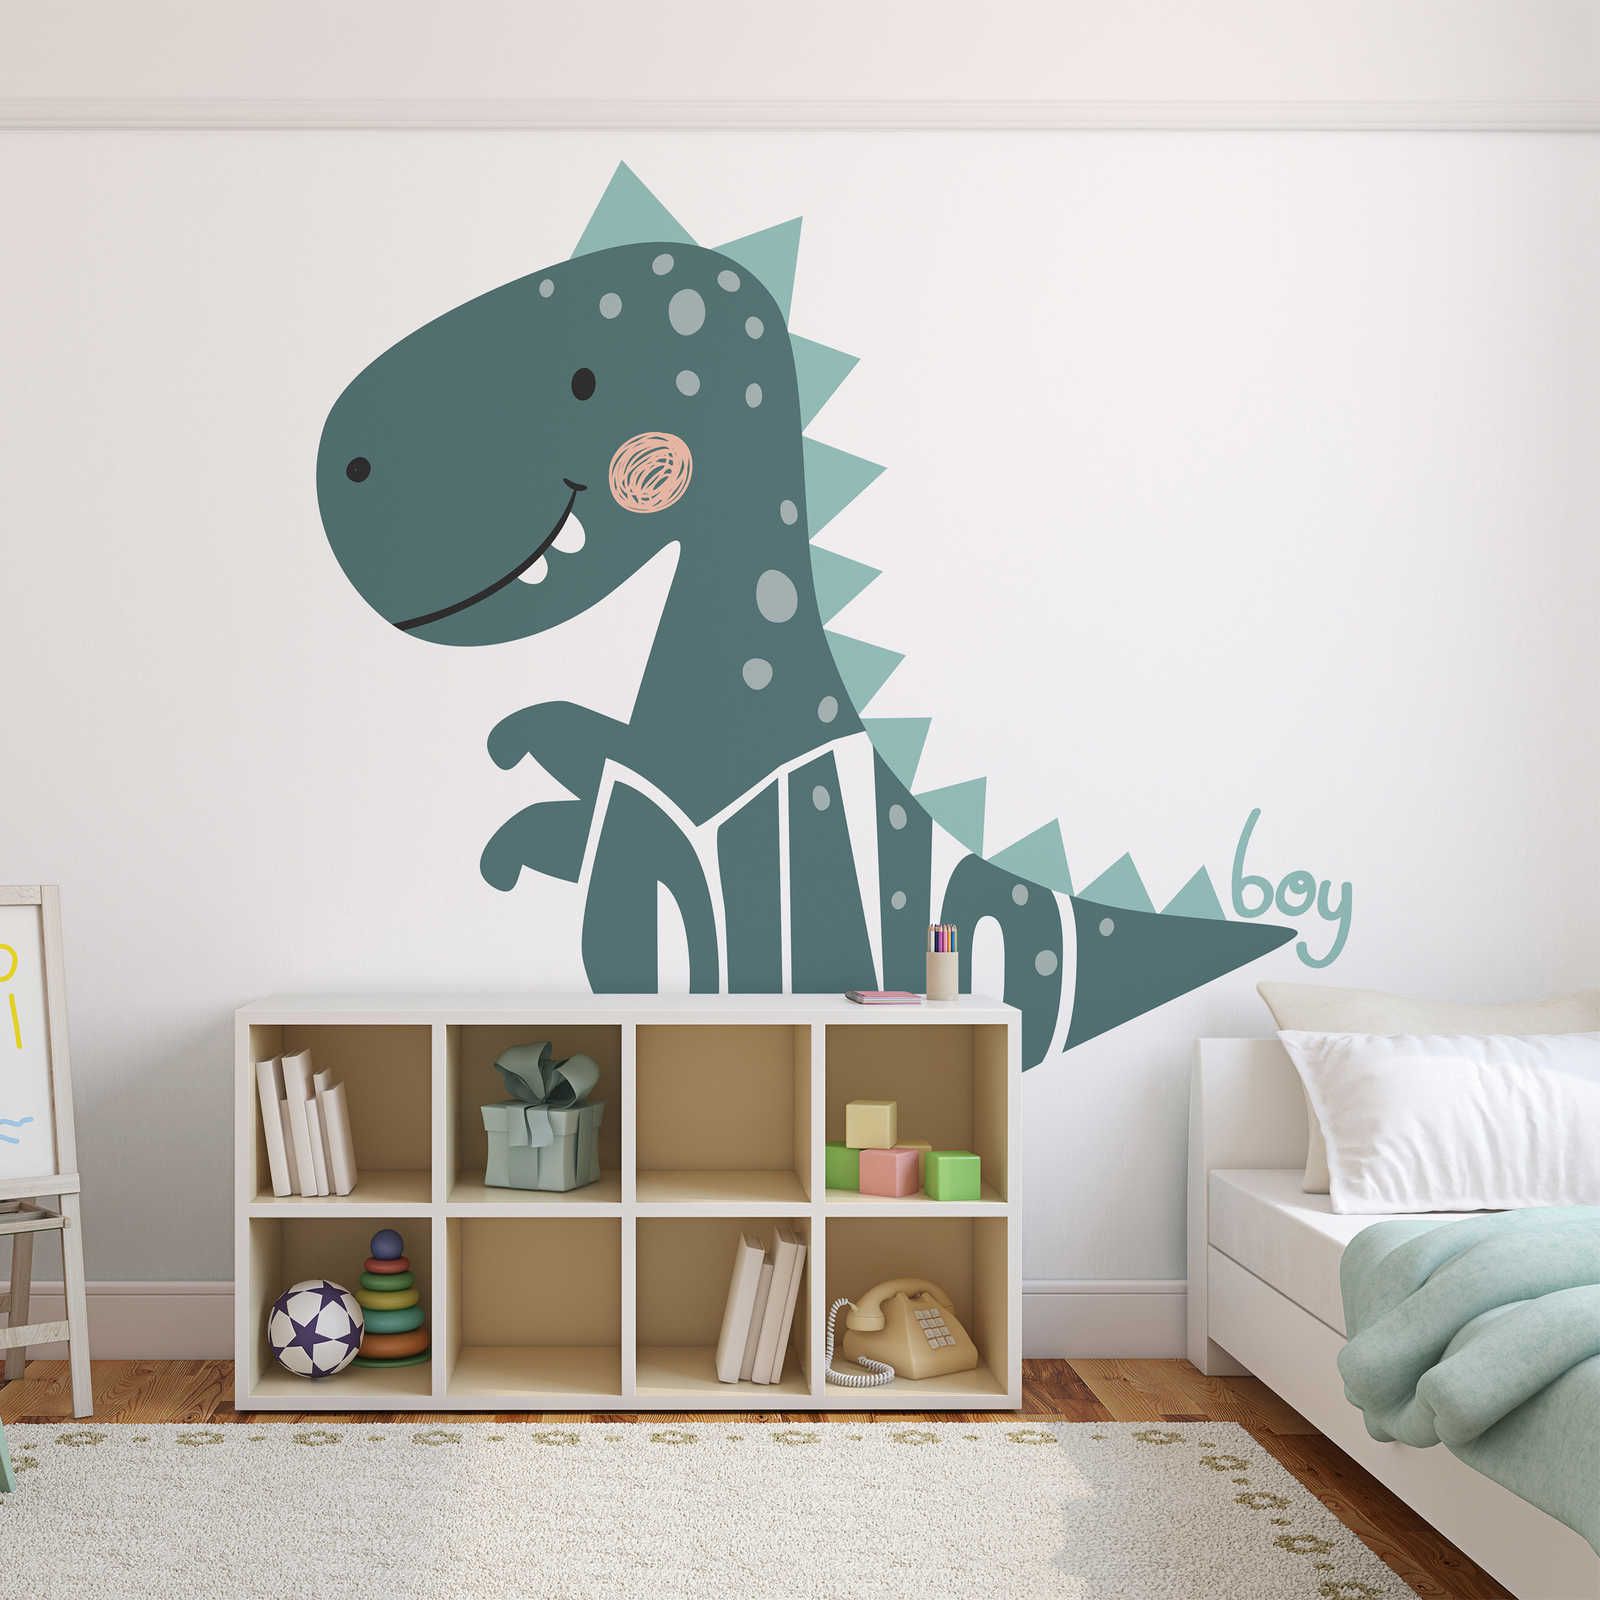         Photo wallpaper for the children's room with dinosaur - Smooth & slightly shiny non-woven
    